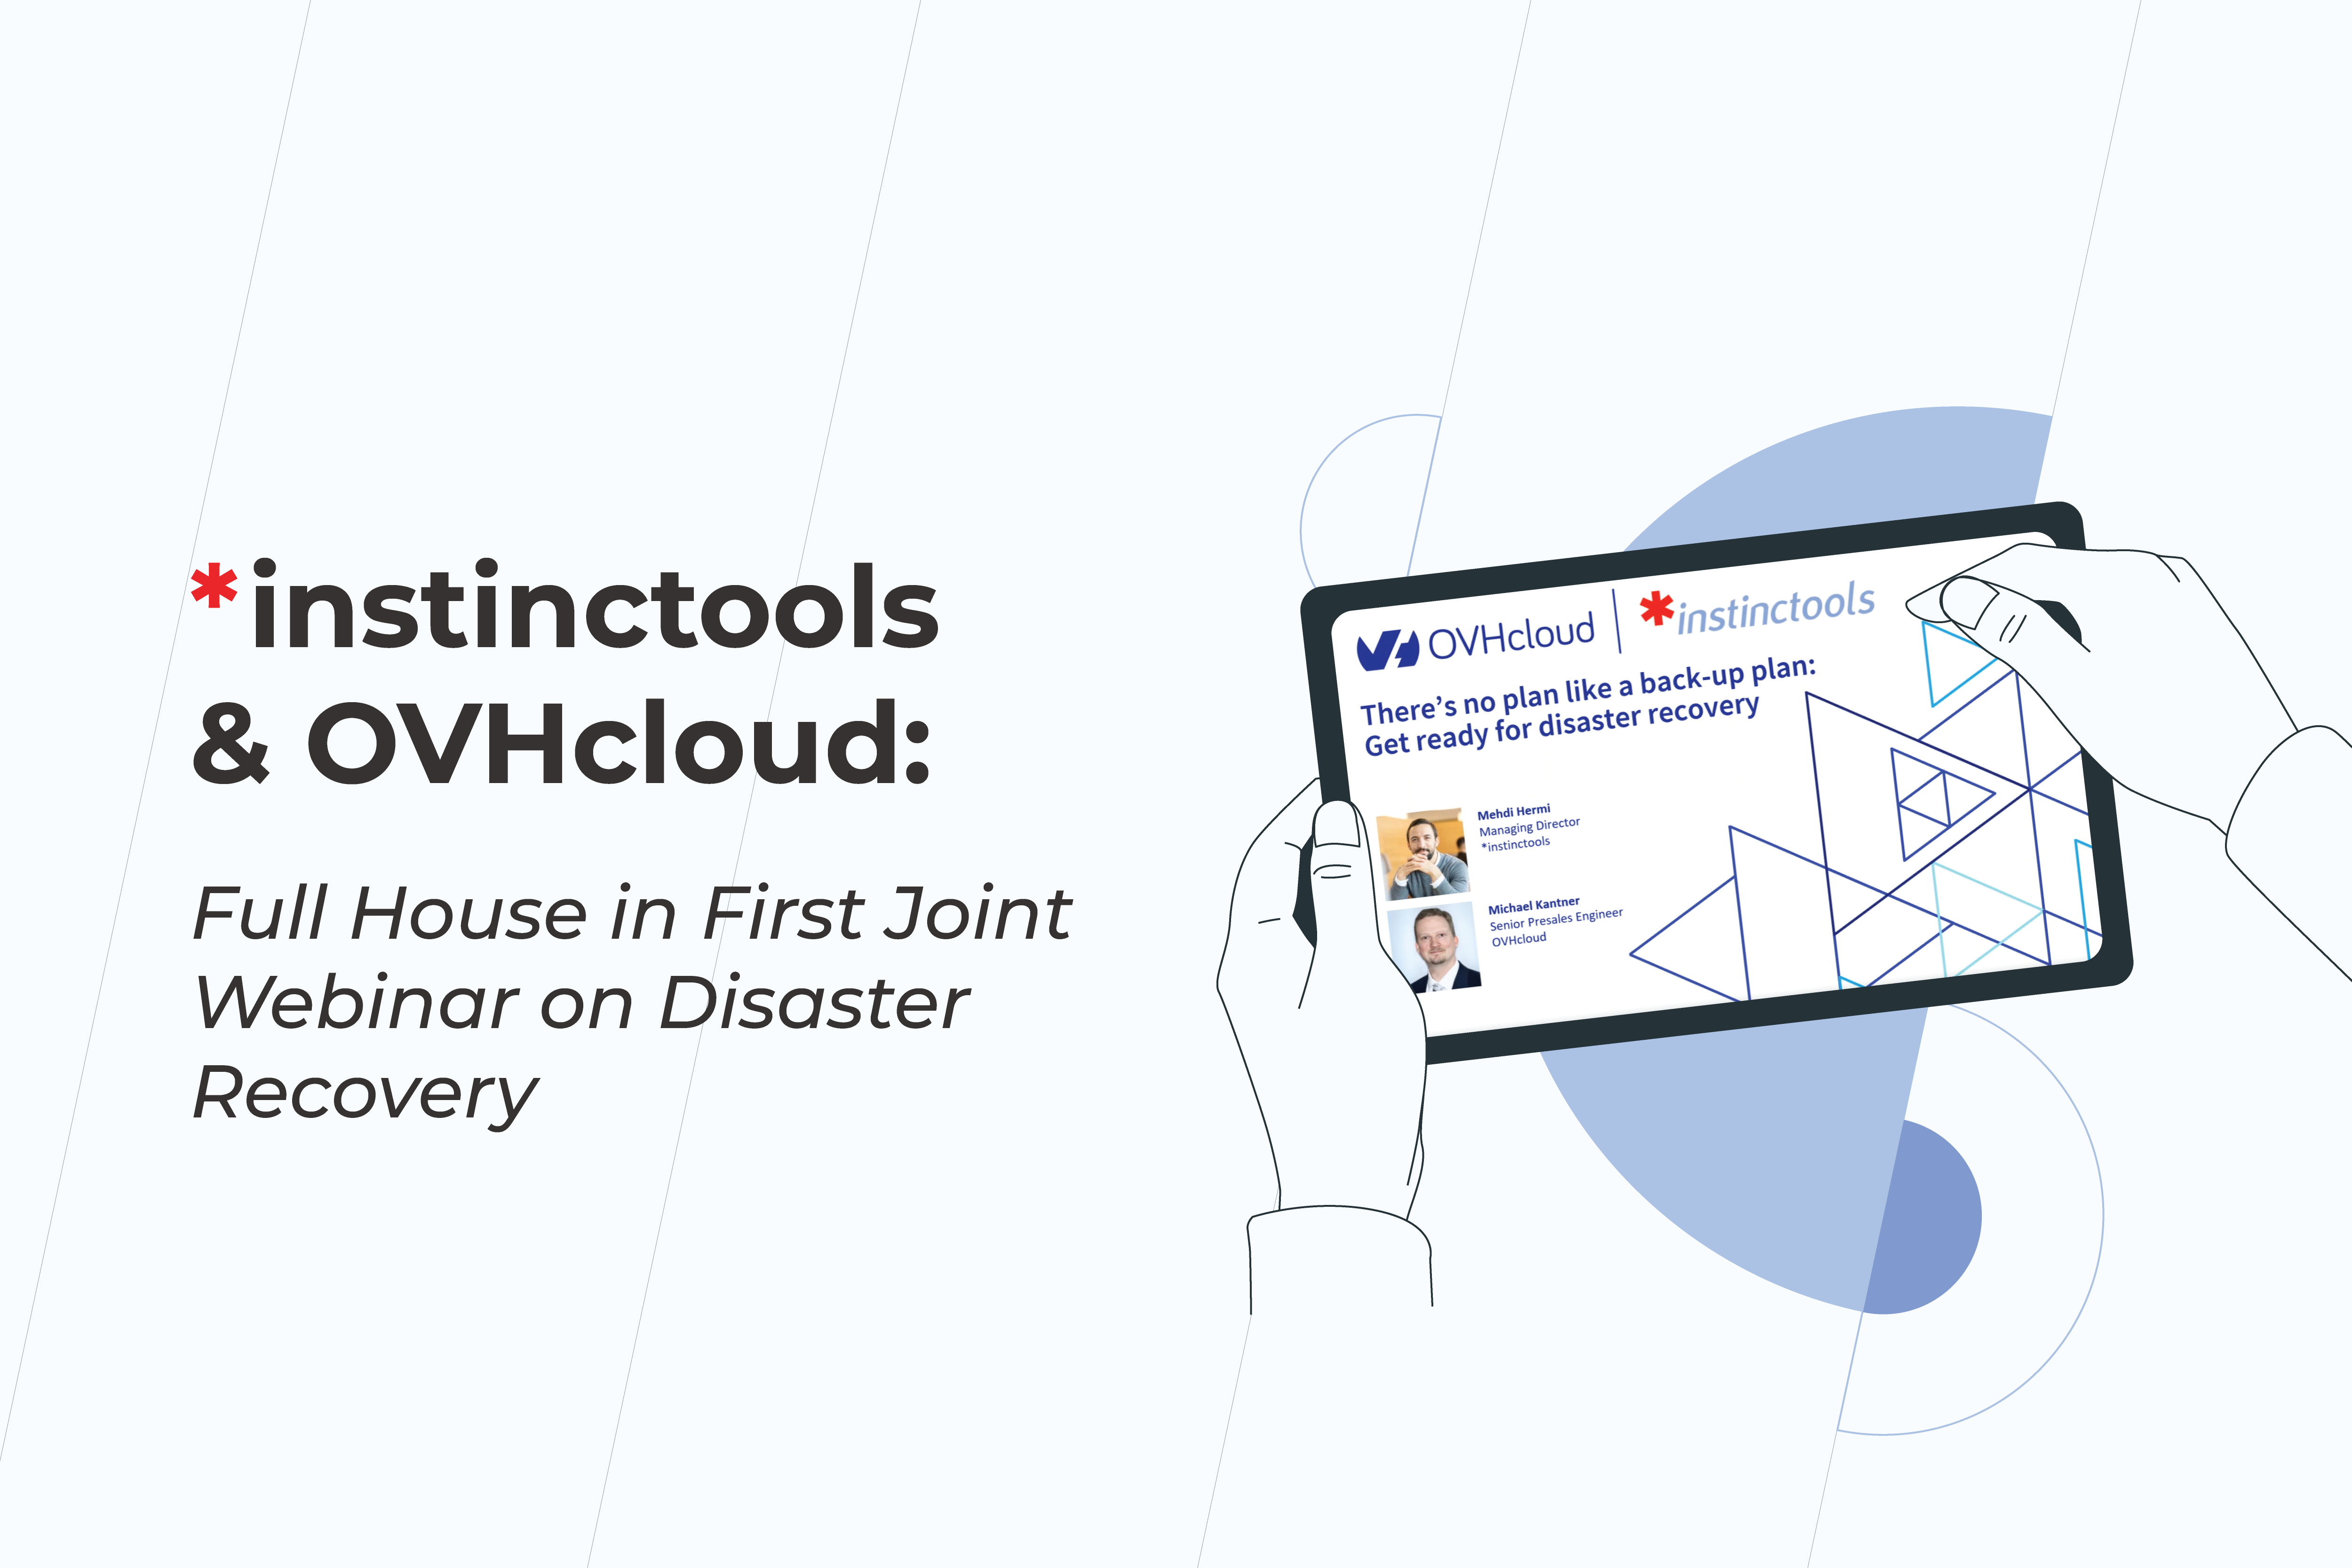 *instinctools & OVHcloud: Full House in First joint Webinar on Disaster Recovery